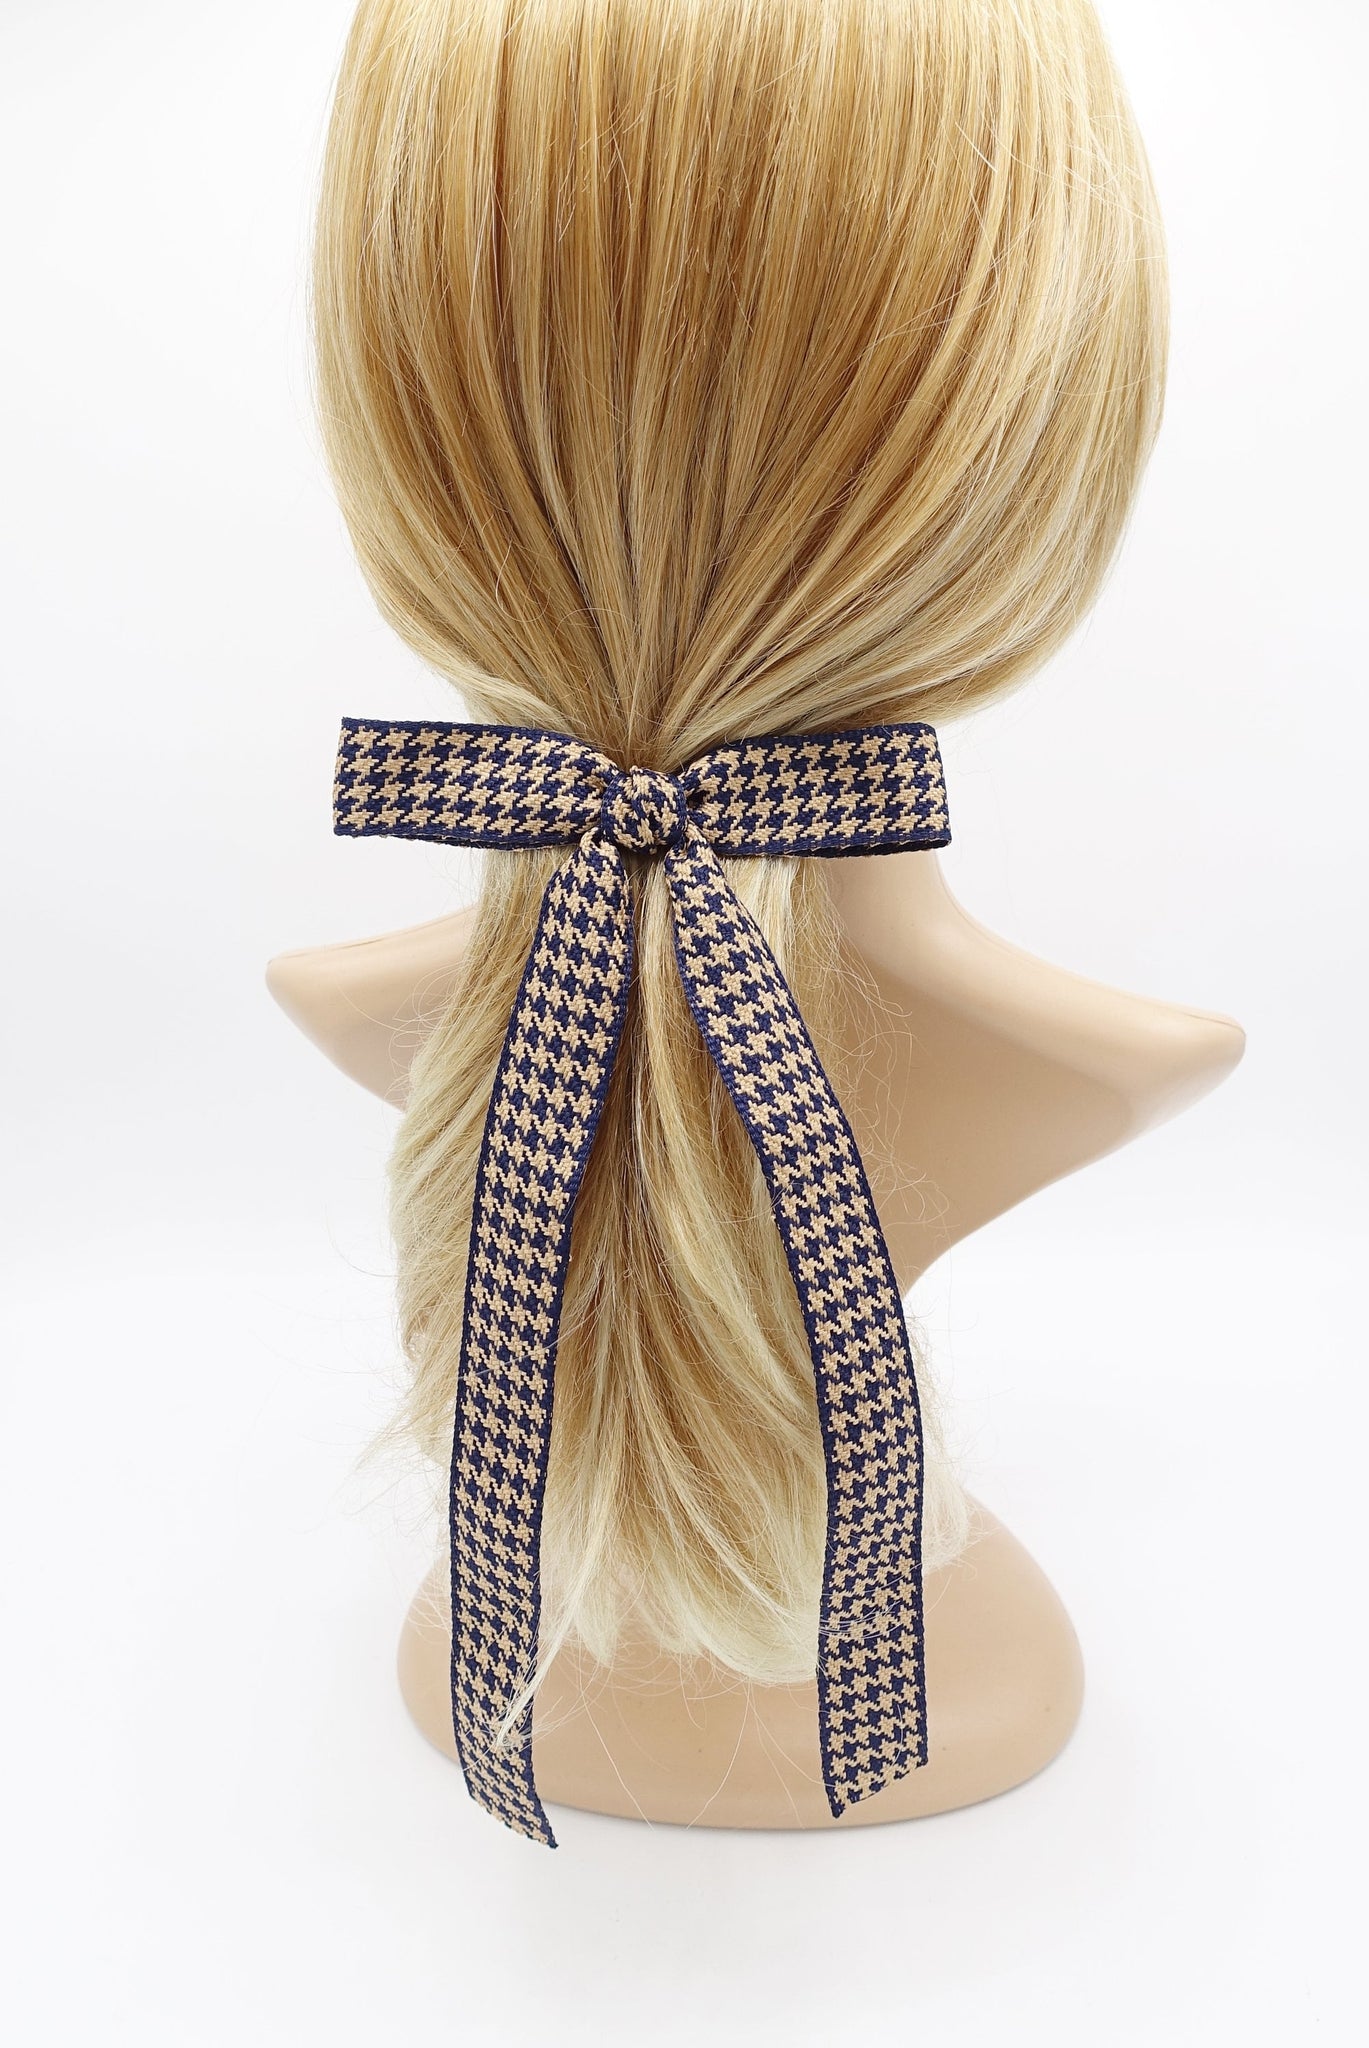 veryshine.com Barrette (Bow) Tail navy houndstooth hair bows for women